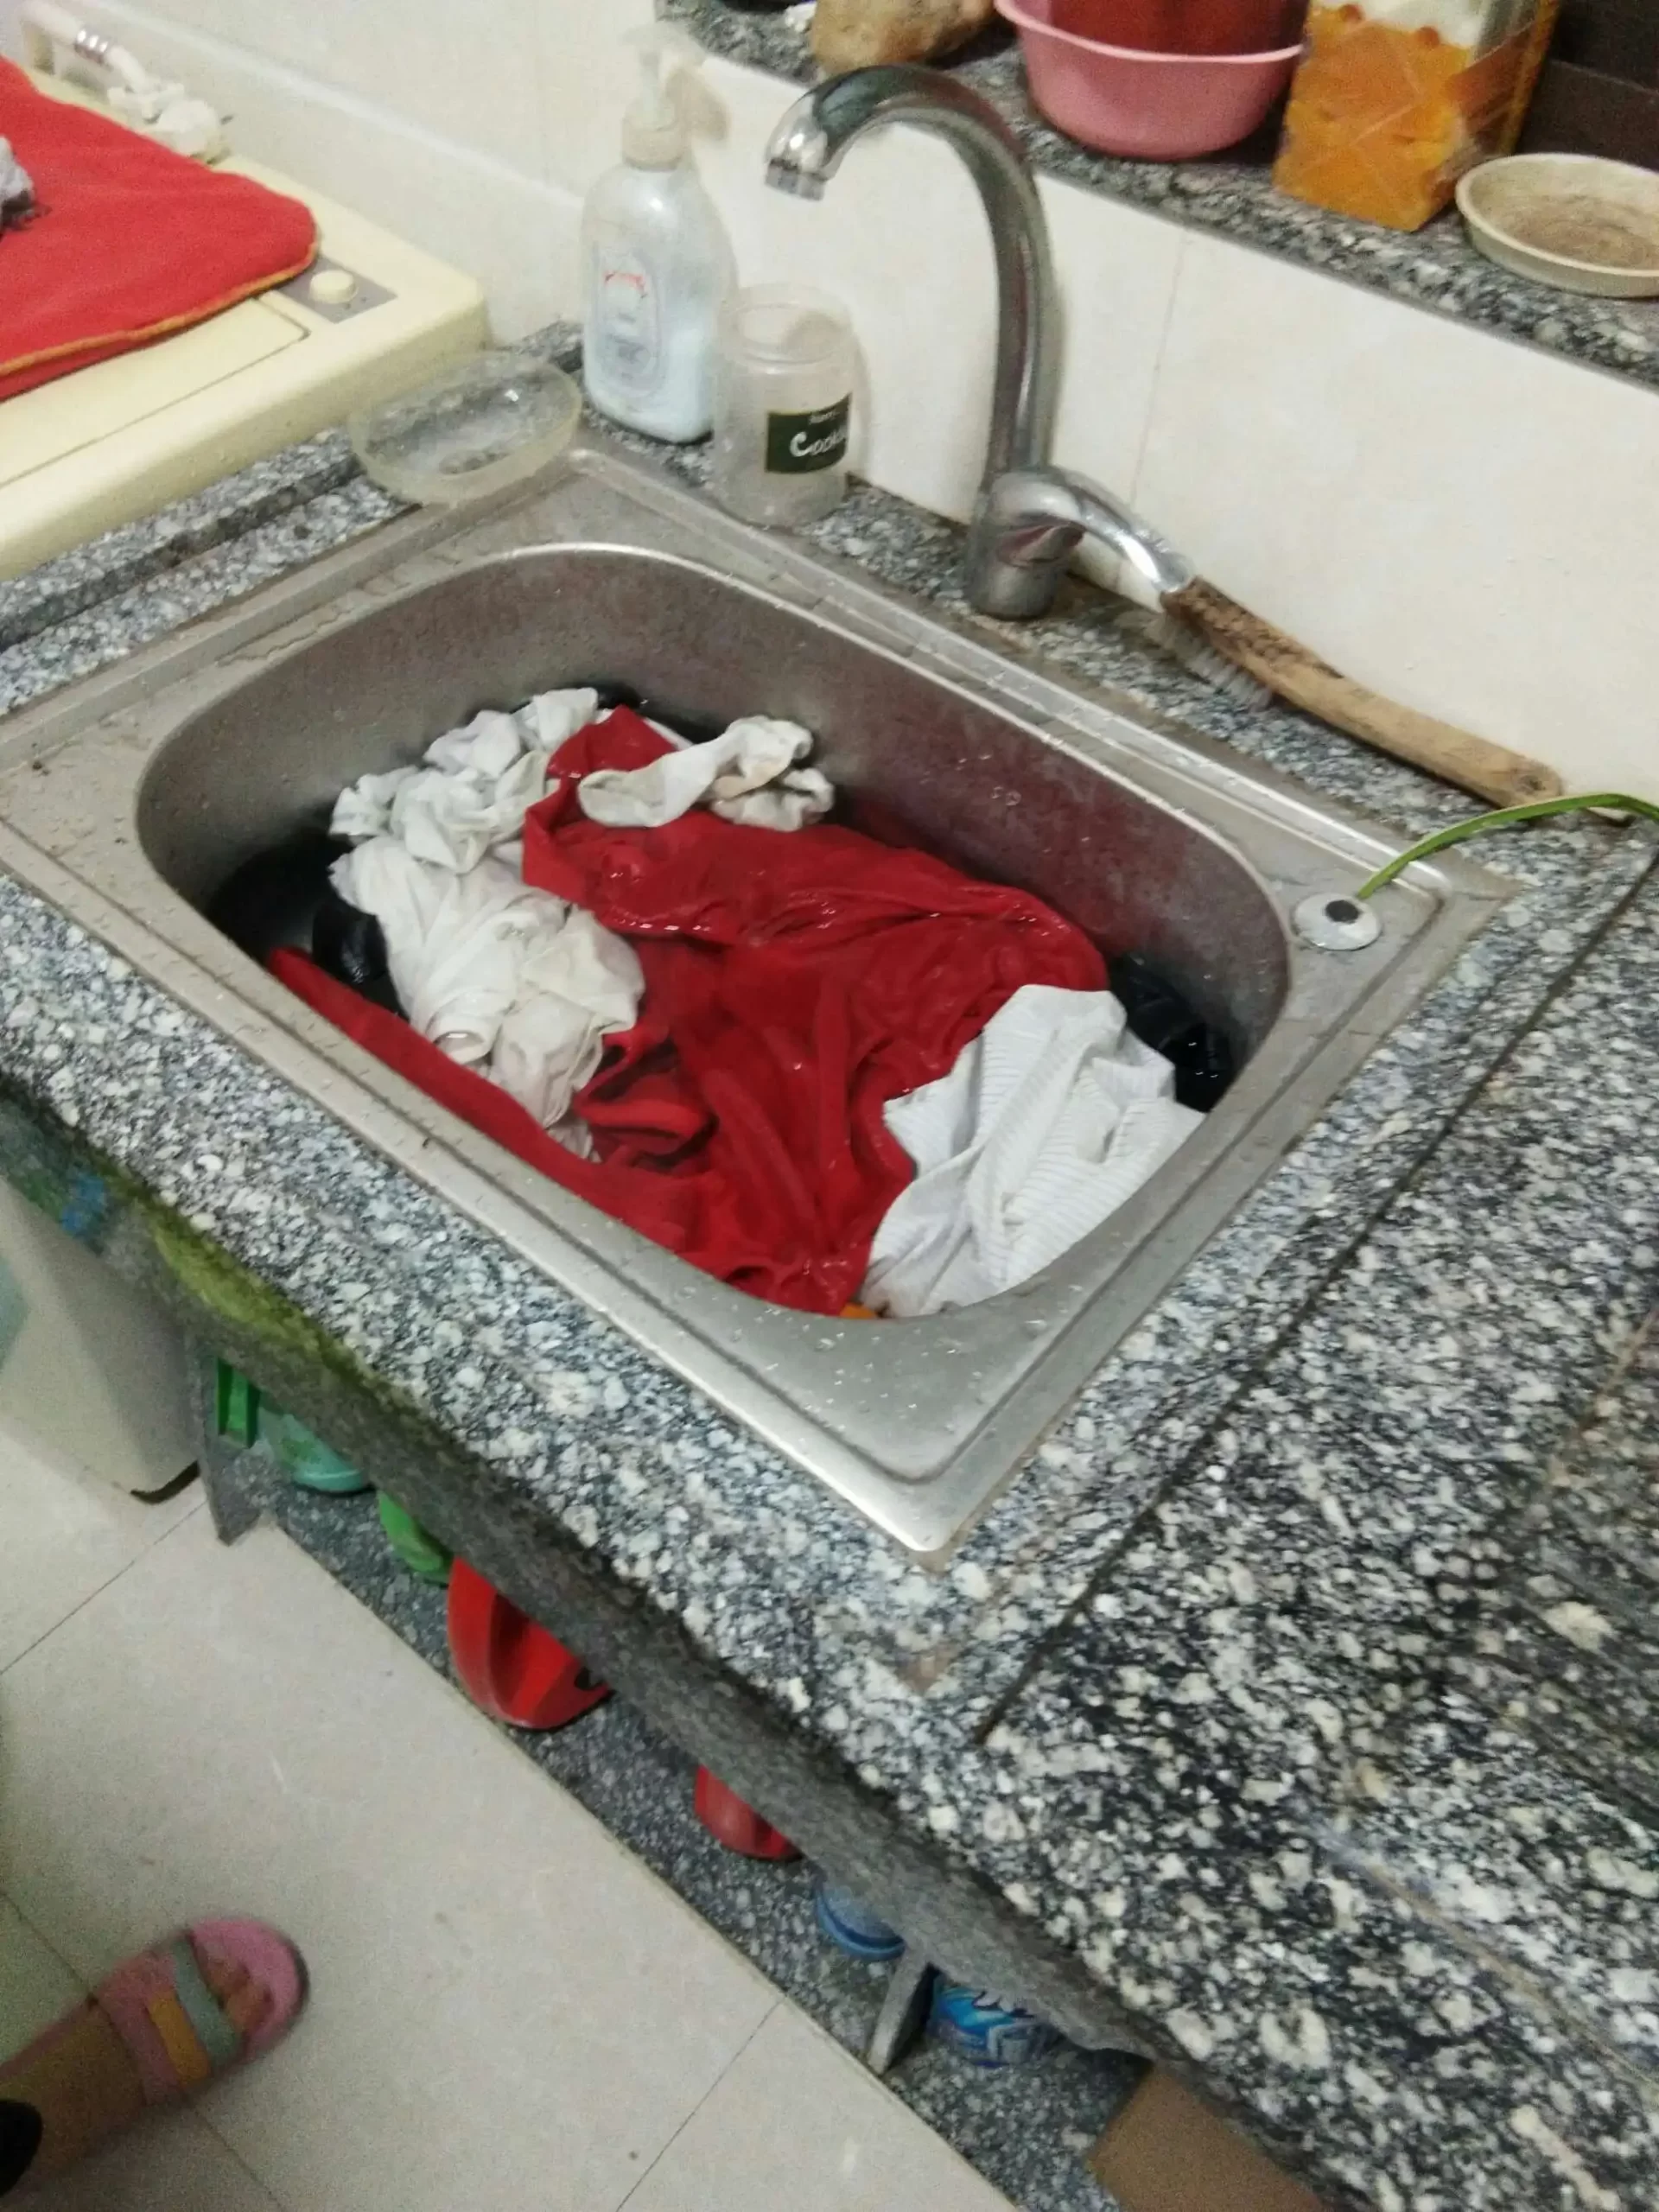 Wash clothes in sink